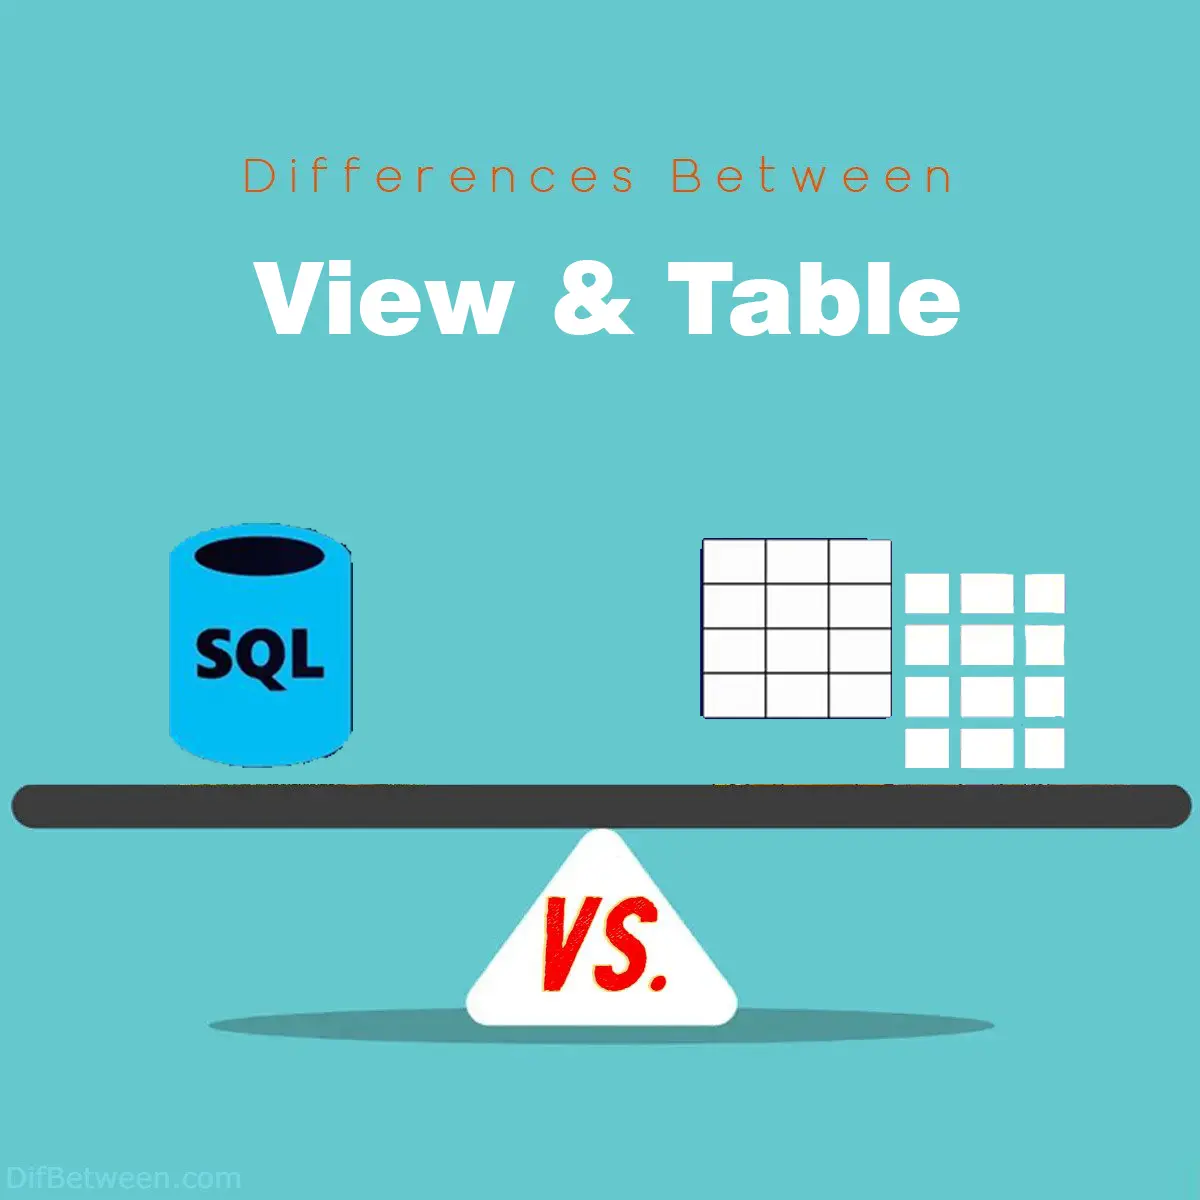 Differences Between view vs table